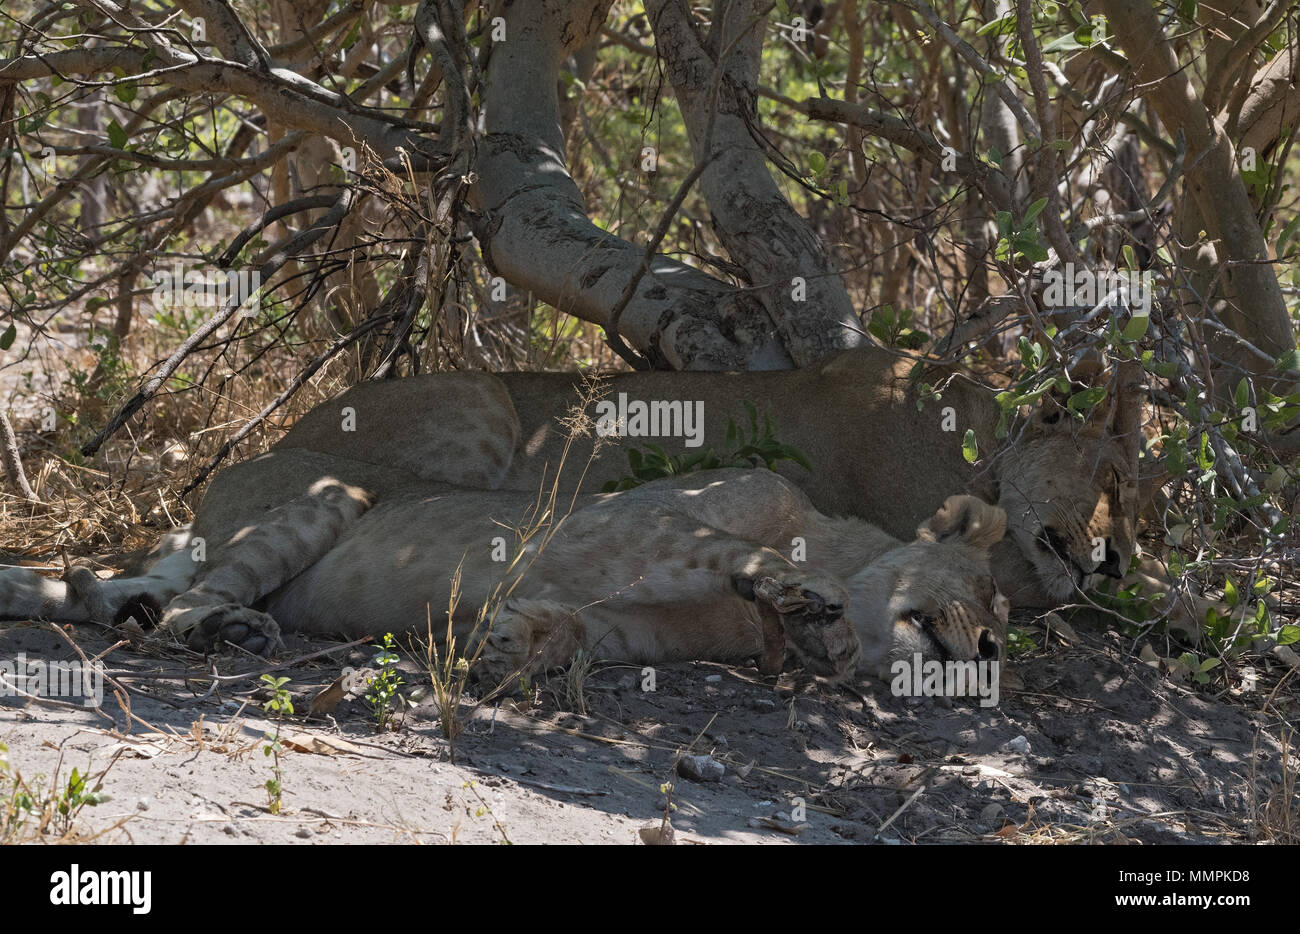 : Sleeping young lion at the roadside in Chobe National Park, Botswana Stock Photo